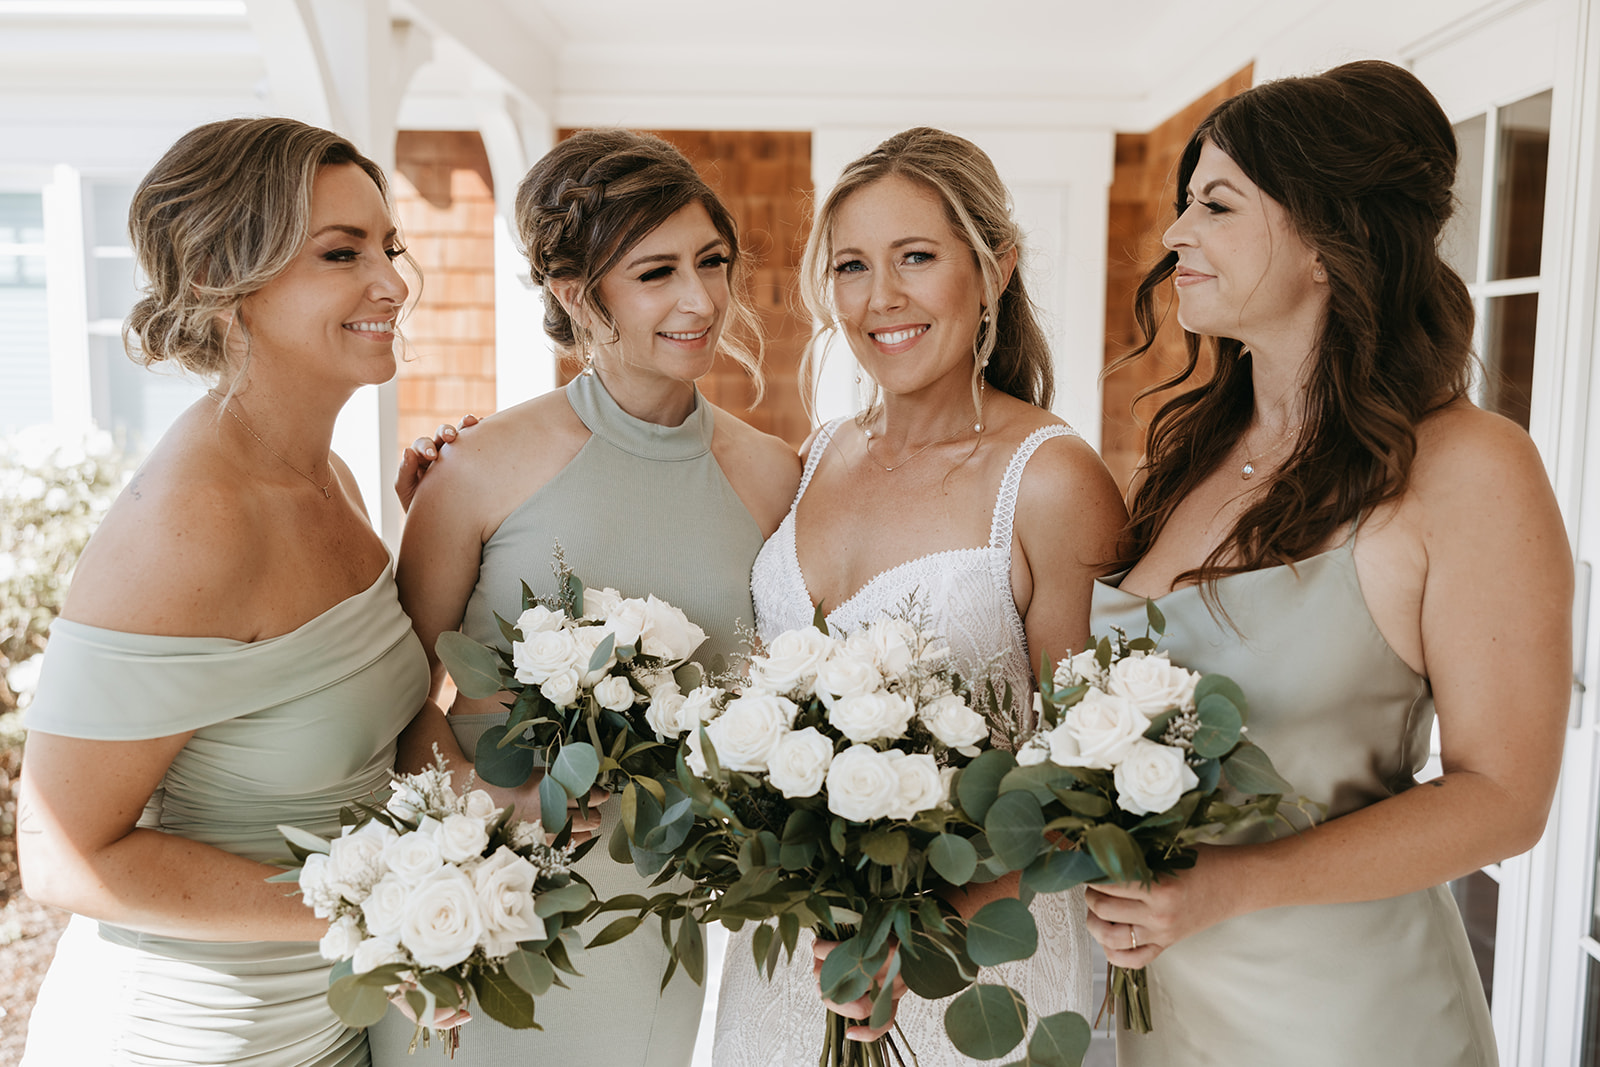 bridesmaids posing with wedding flowers | The Penny: A Downtown Wedding Venue in San Luis Obispo